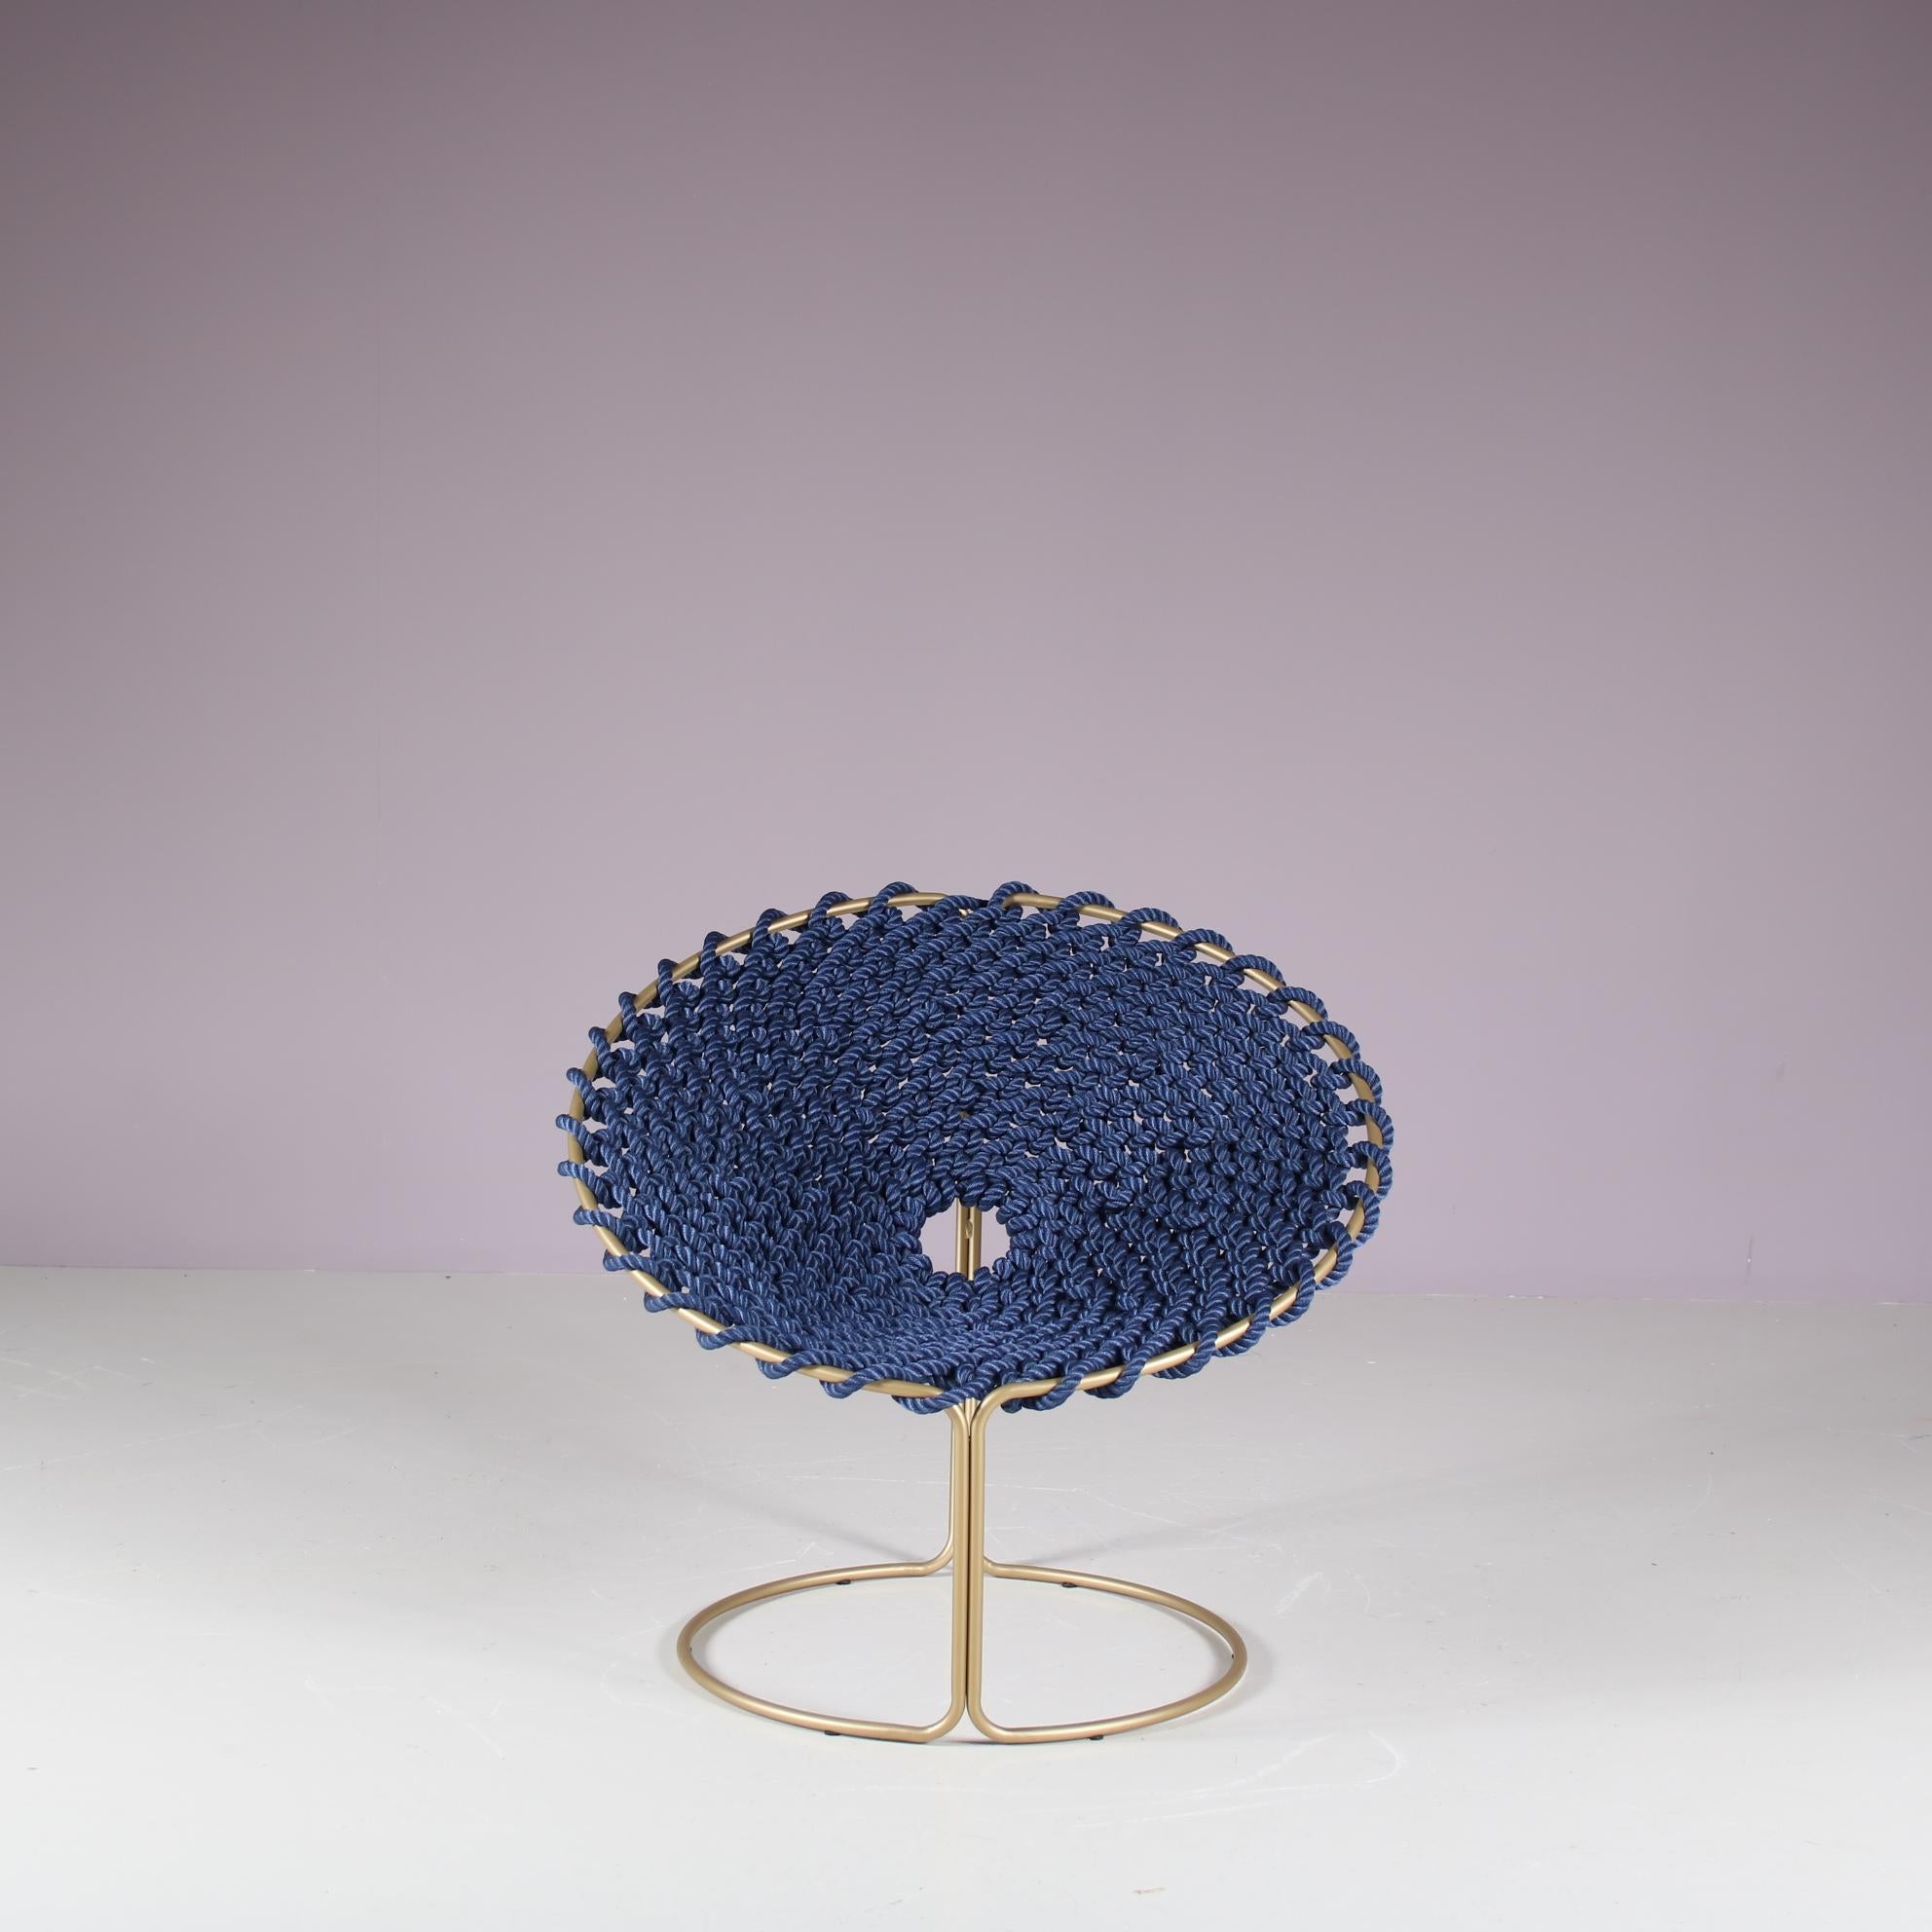 An eye-catching “Femme” chair, a 21st century design designed by Rik ten Velden, manufactured in the Netherlands.

As part of the maritime inspired “knotted collection”, this chair is made of thick purple knotted rope. The round seat is entirely